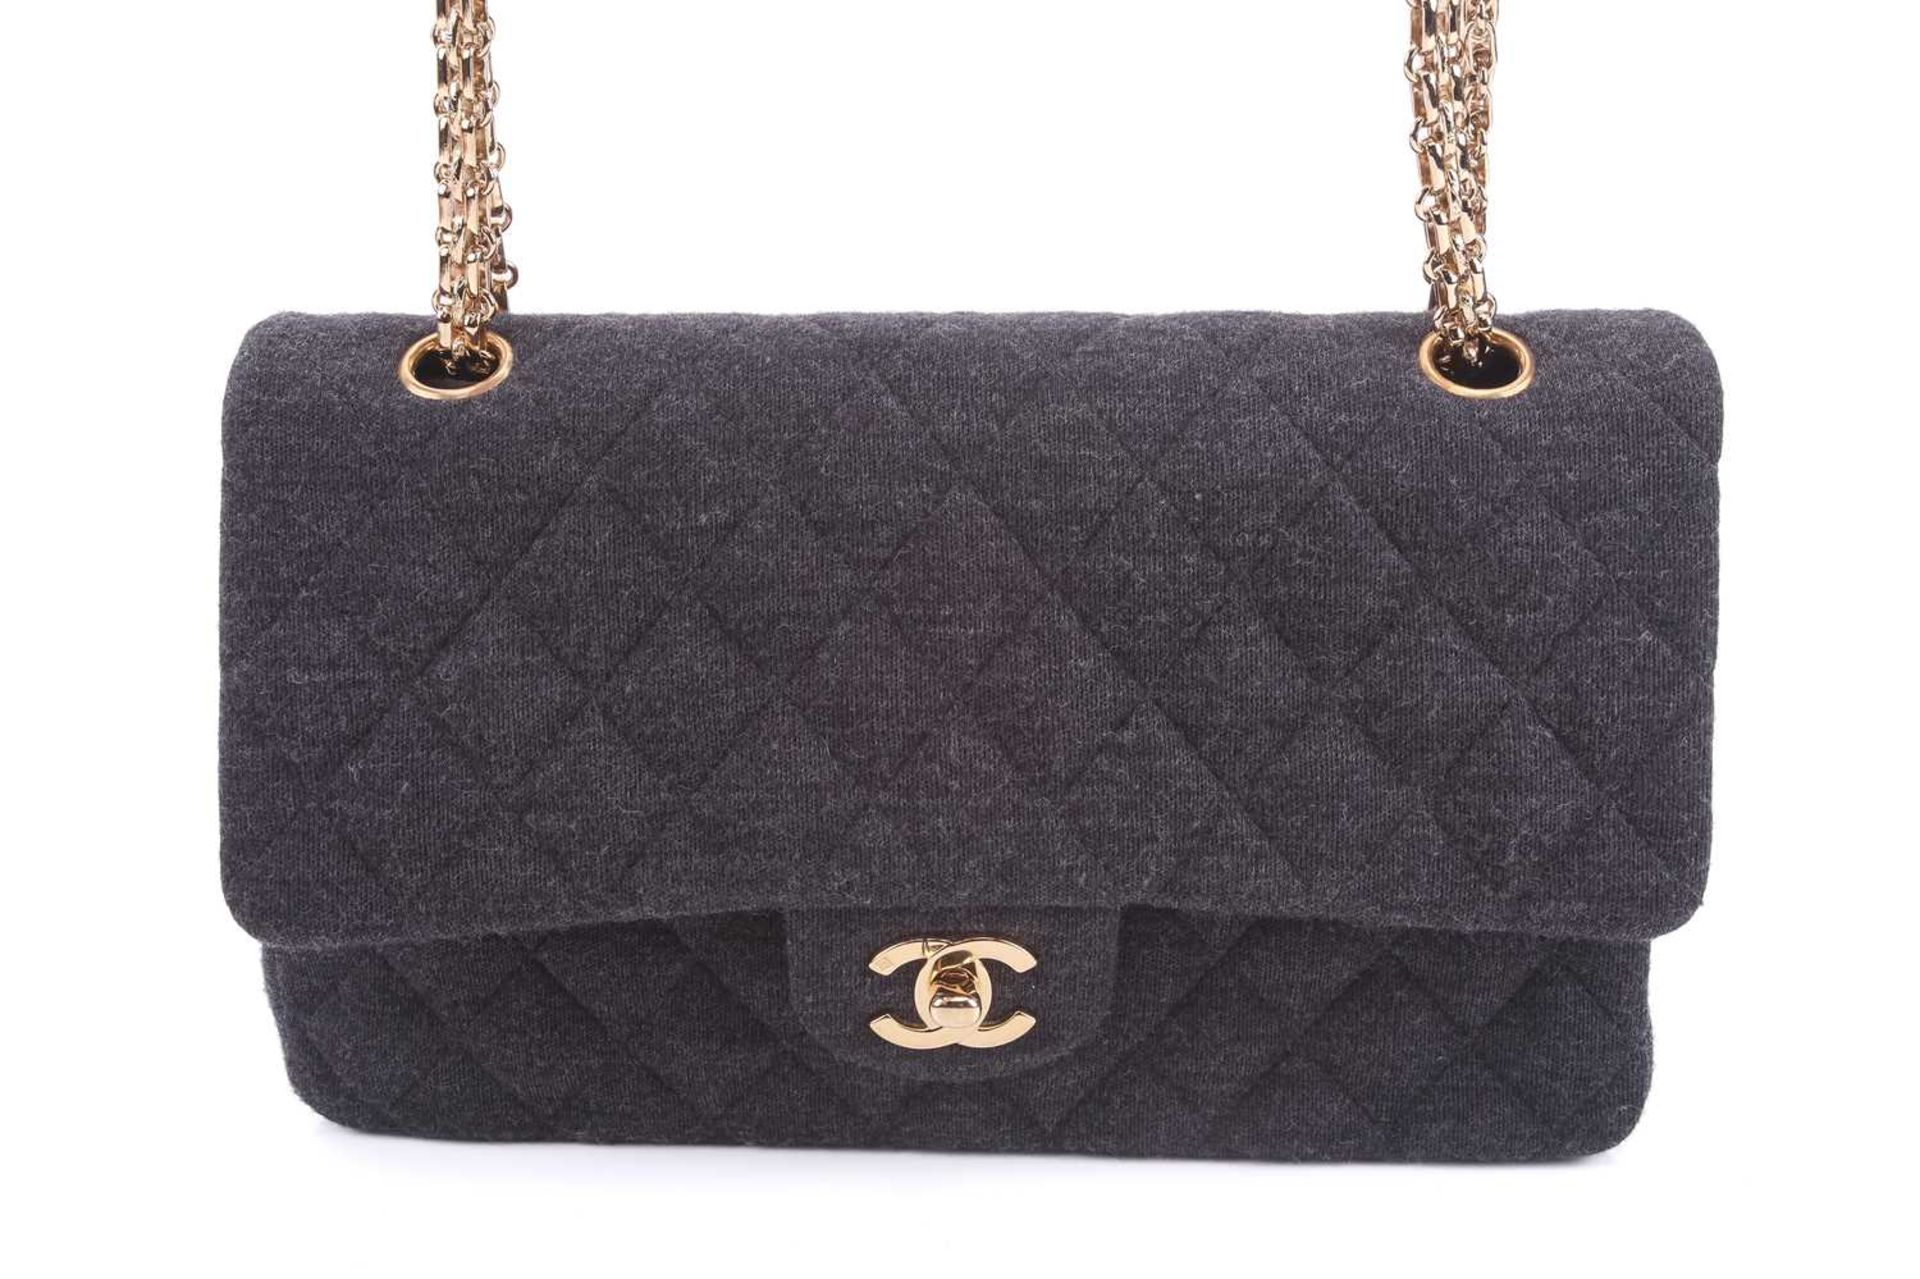 Chanel - a classic double flap bag in charcoal grey jersey fabric, circa 2002, rectangular body with - Image 5 of 14